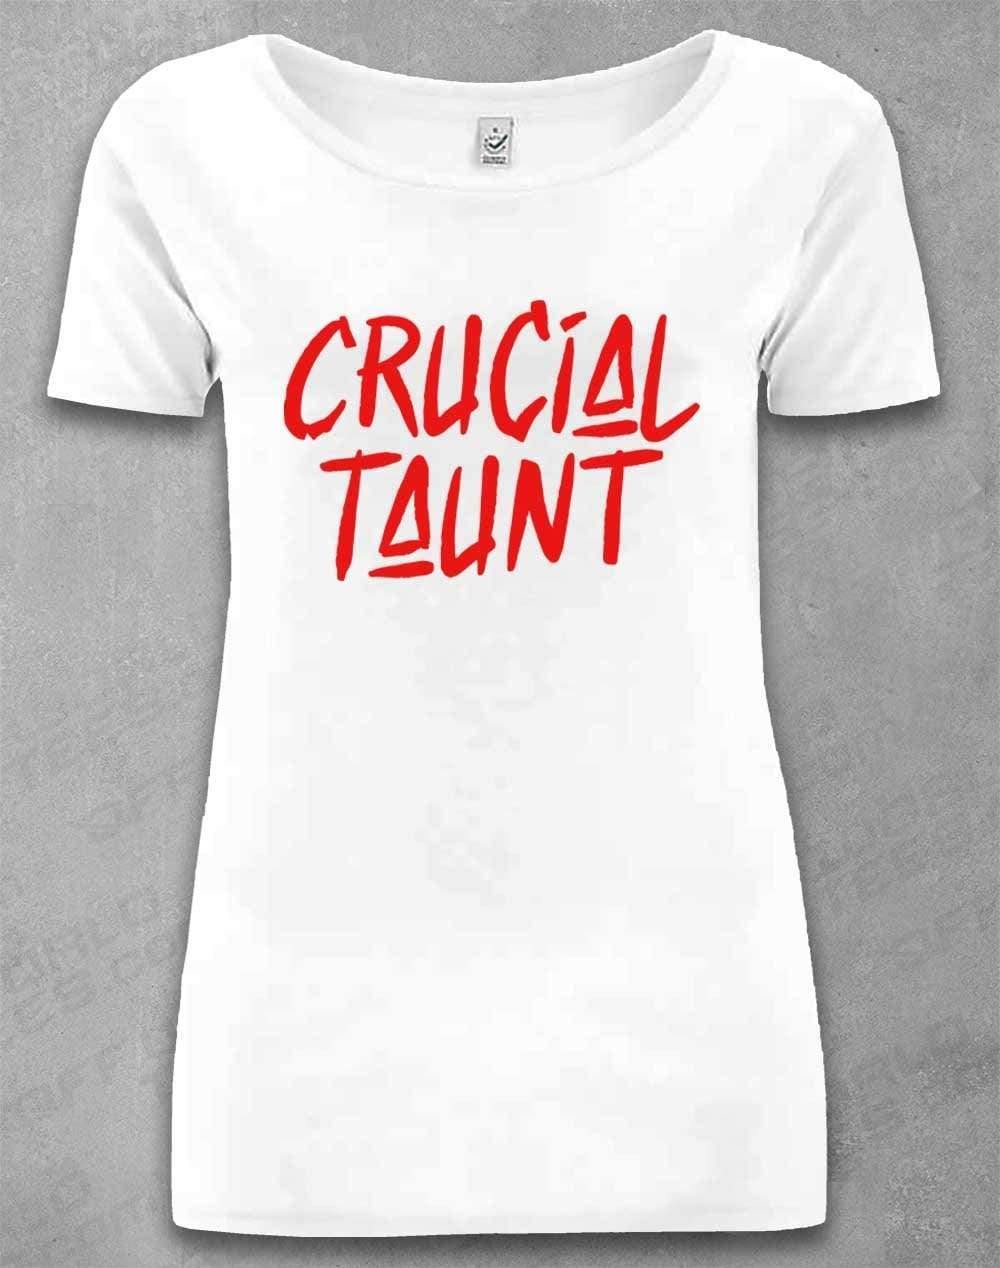 DELUXE Crucial Taunt Organic Scoop Neck T-Shirt 8-10 / White  - Off World Tees